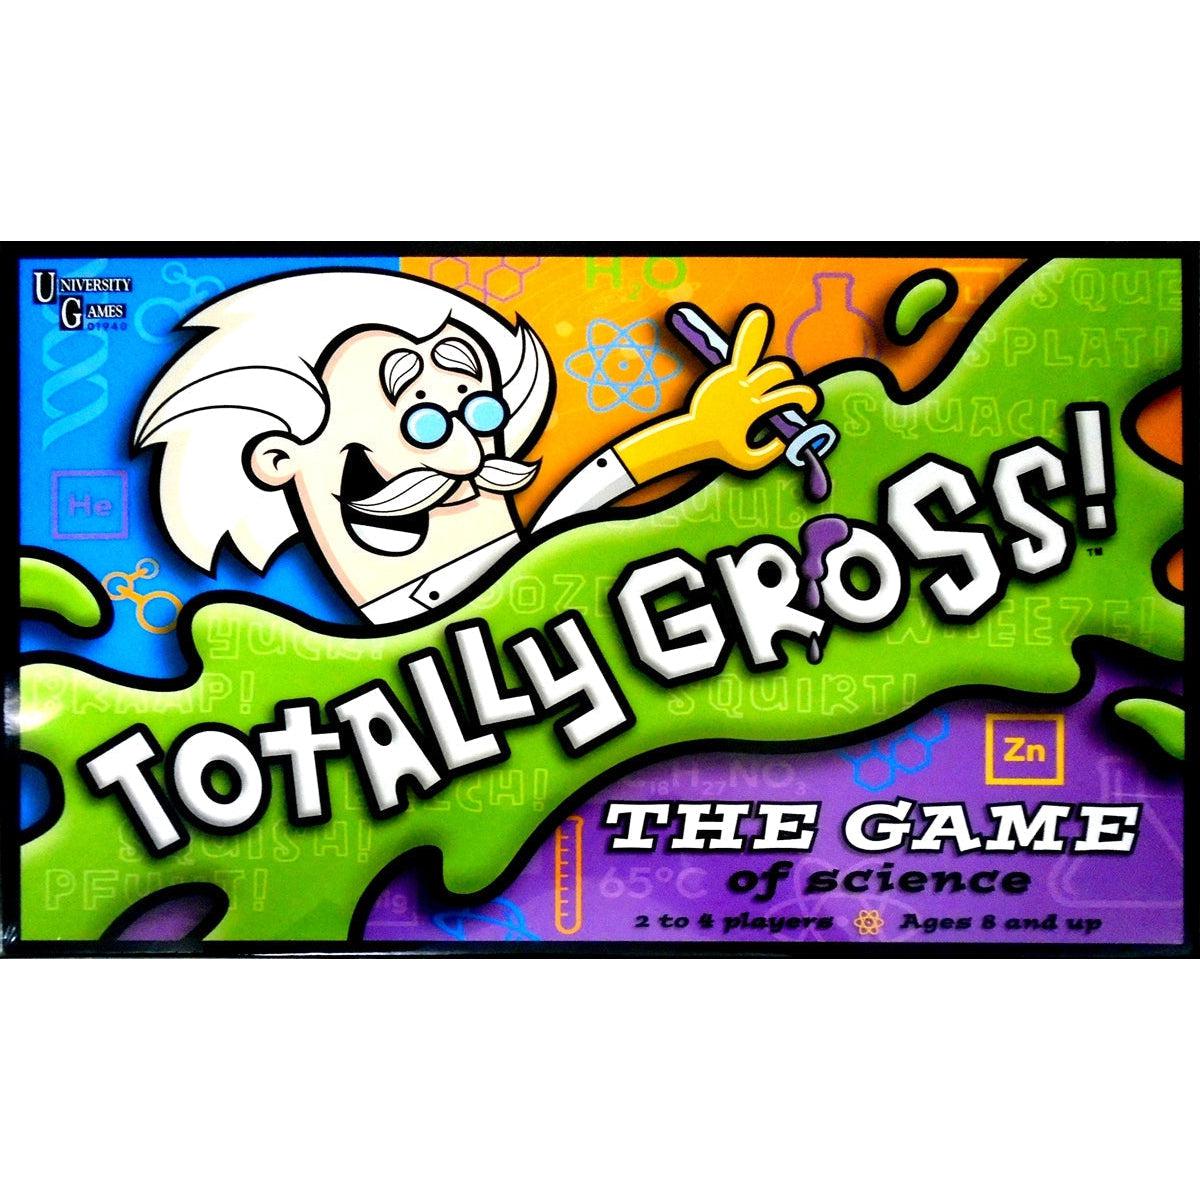 University Games-Totally Gross - The Game of Science Board Game-01940-Legacy Toys